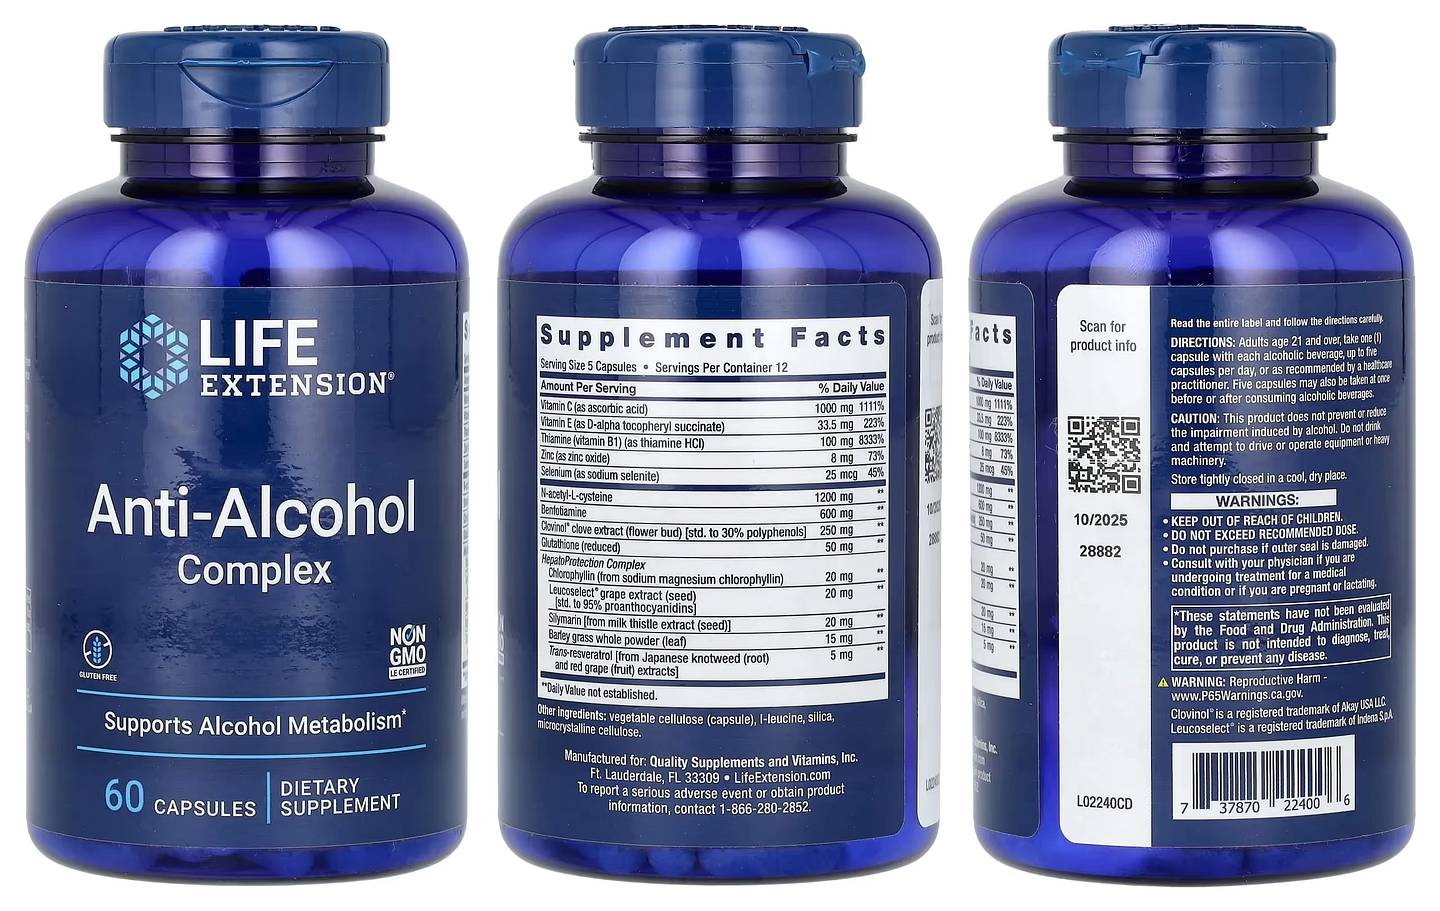 Life Extension, Anti-Alcohol Complex packaging